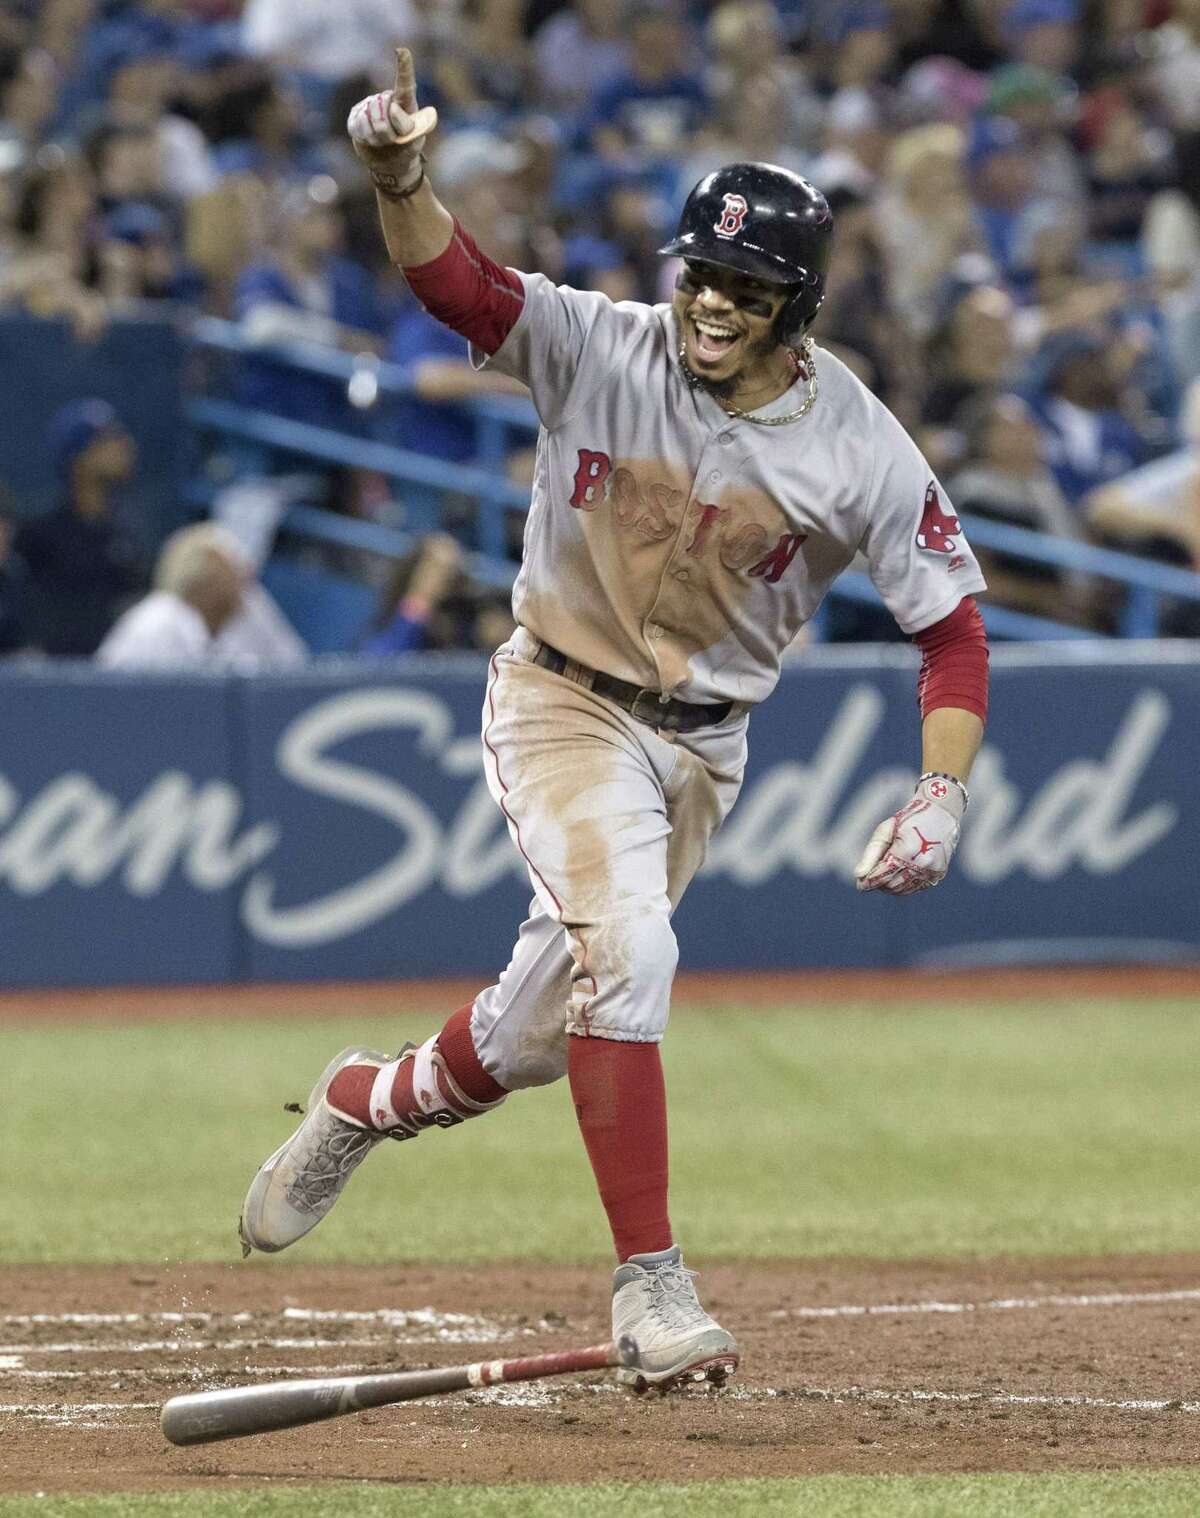 The Red Sox’s Mookie Betts celebrates after hitting a home run during the ninth inning against the Blue Jays on Aug. 9.